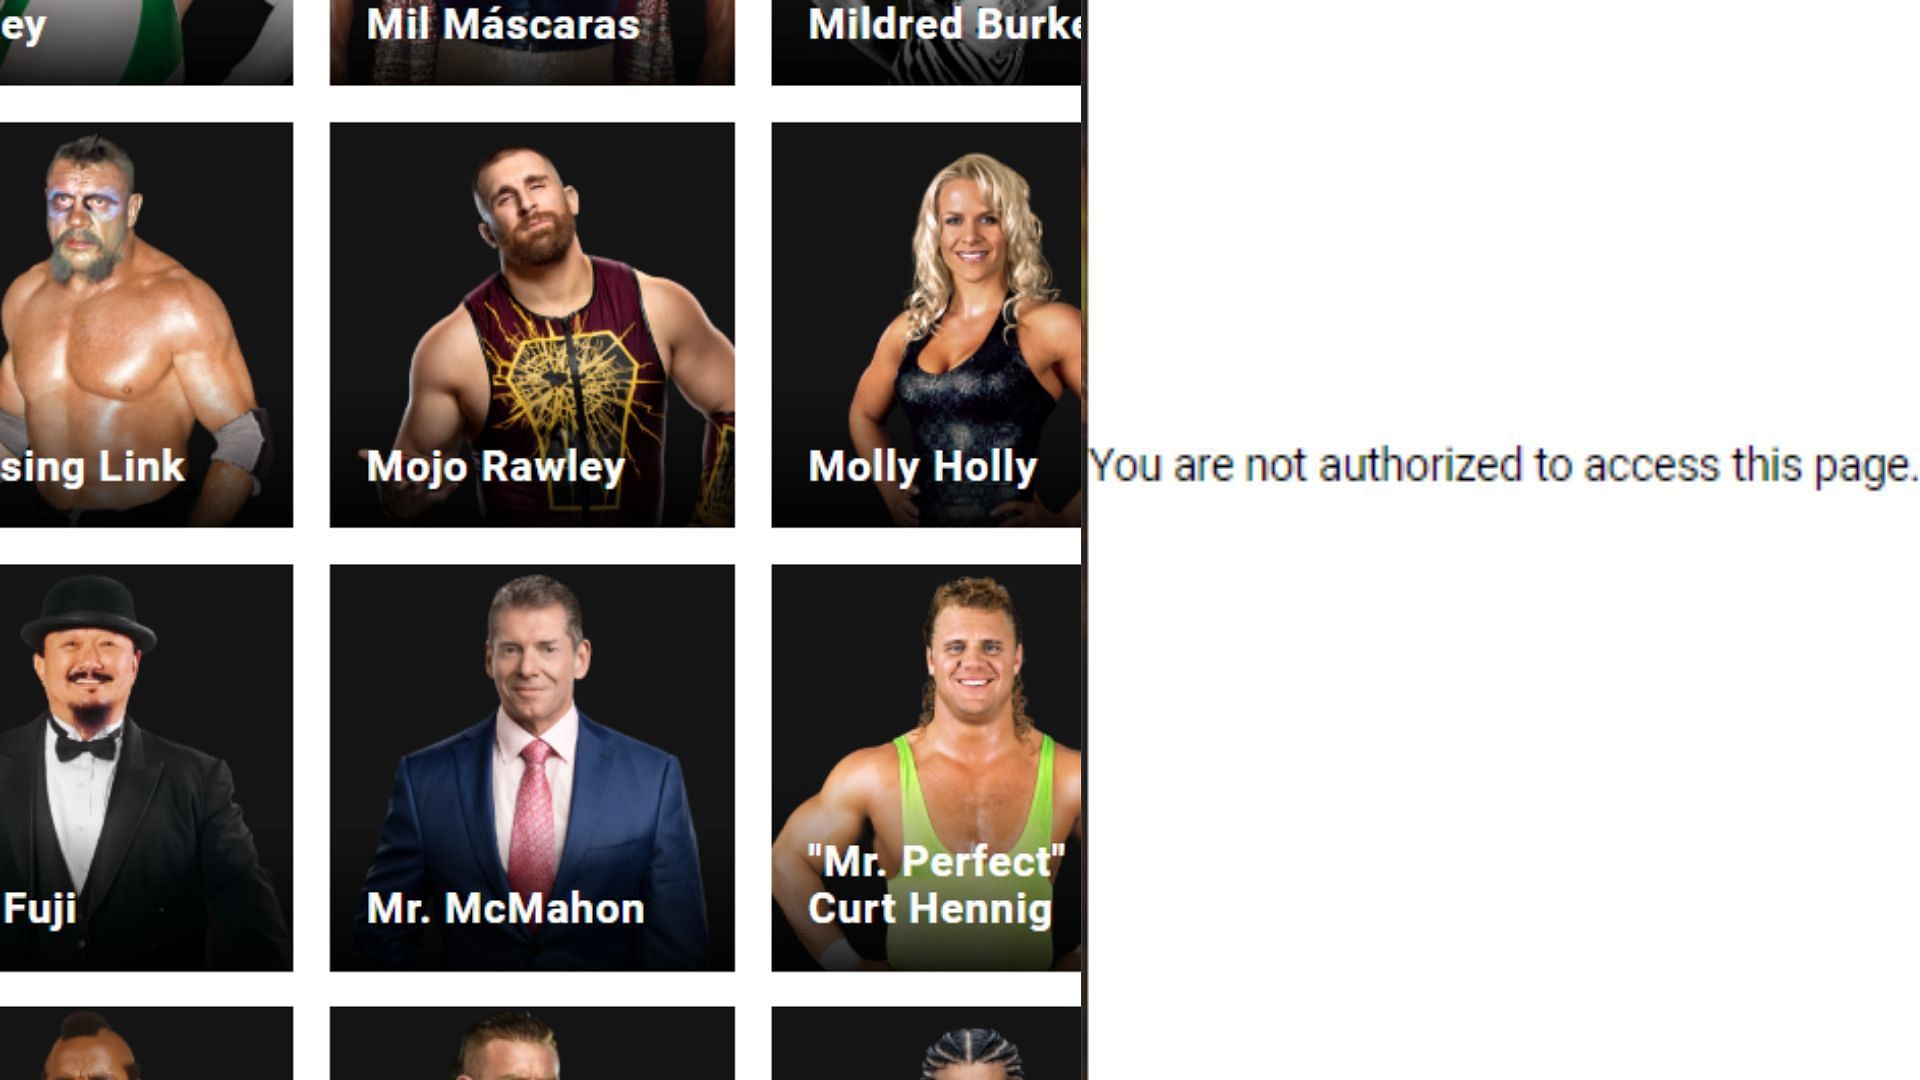 The profile can no longer be accessed (Screenshot from WWE.com)